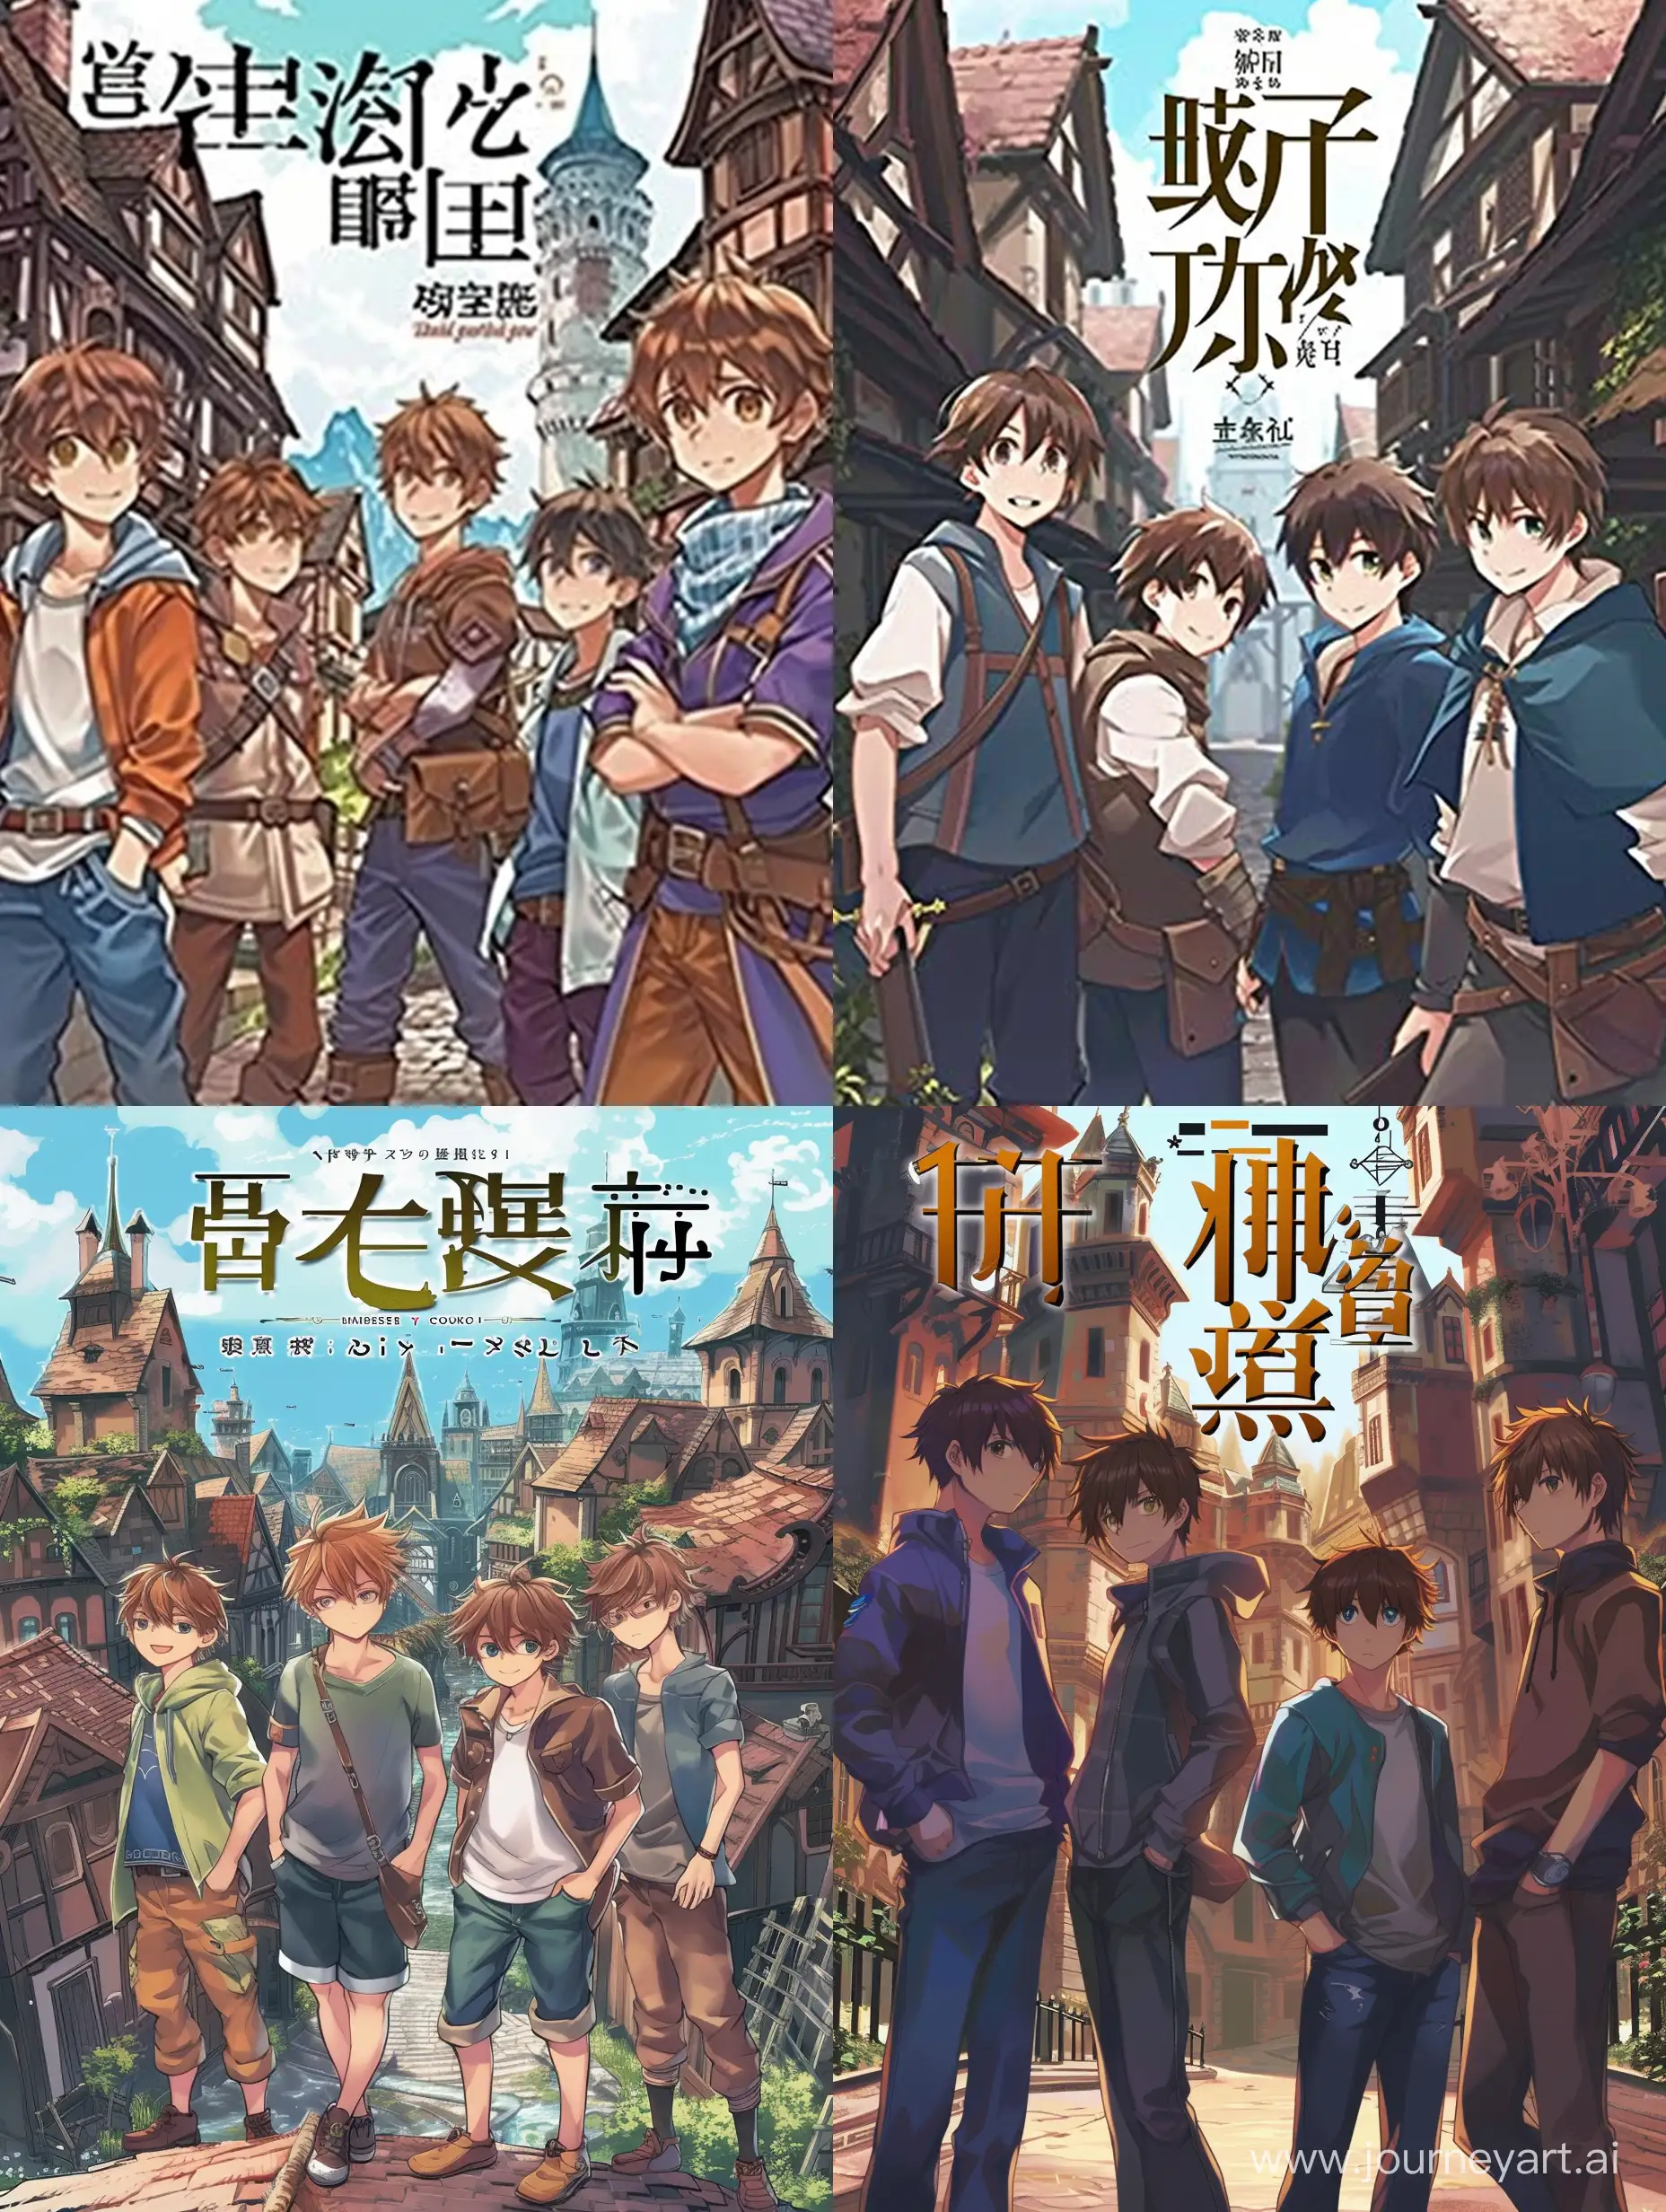 The cover for light novel, four boys and fantasy world with buildings, genres: fantasy and isekai.